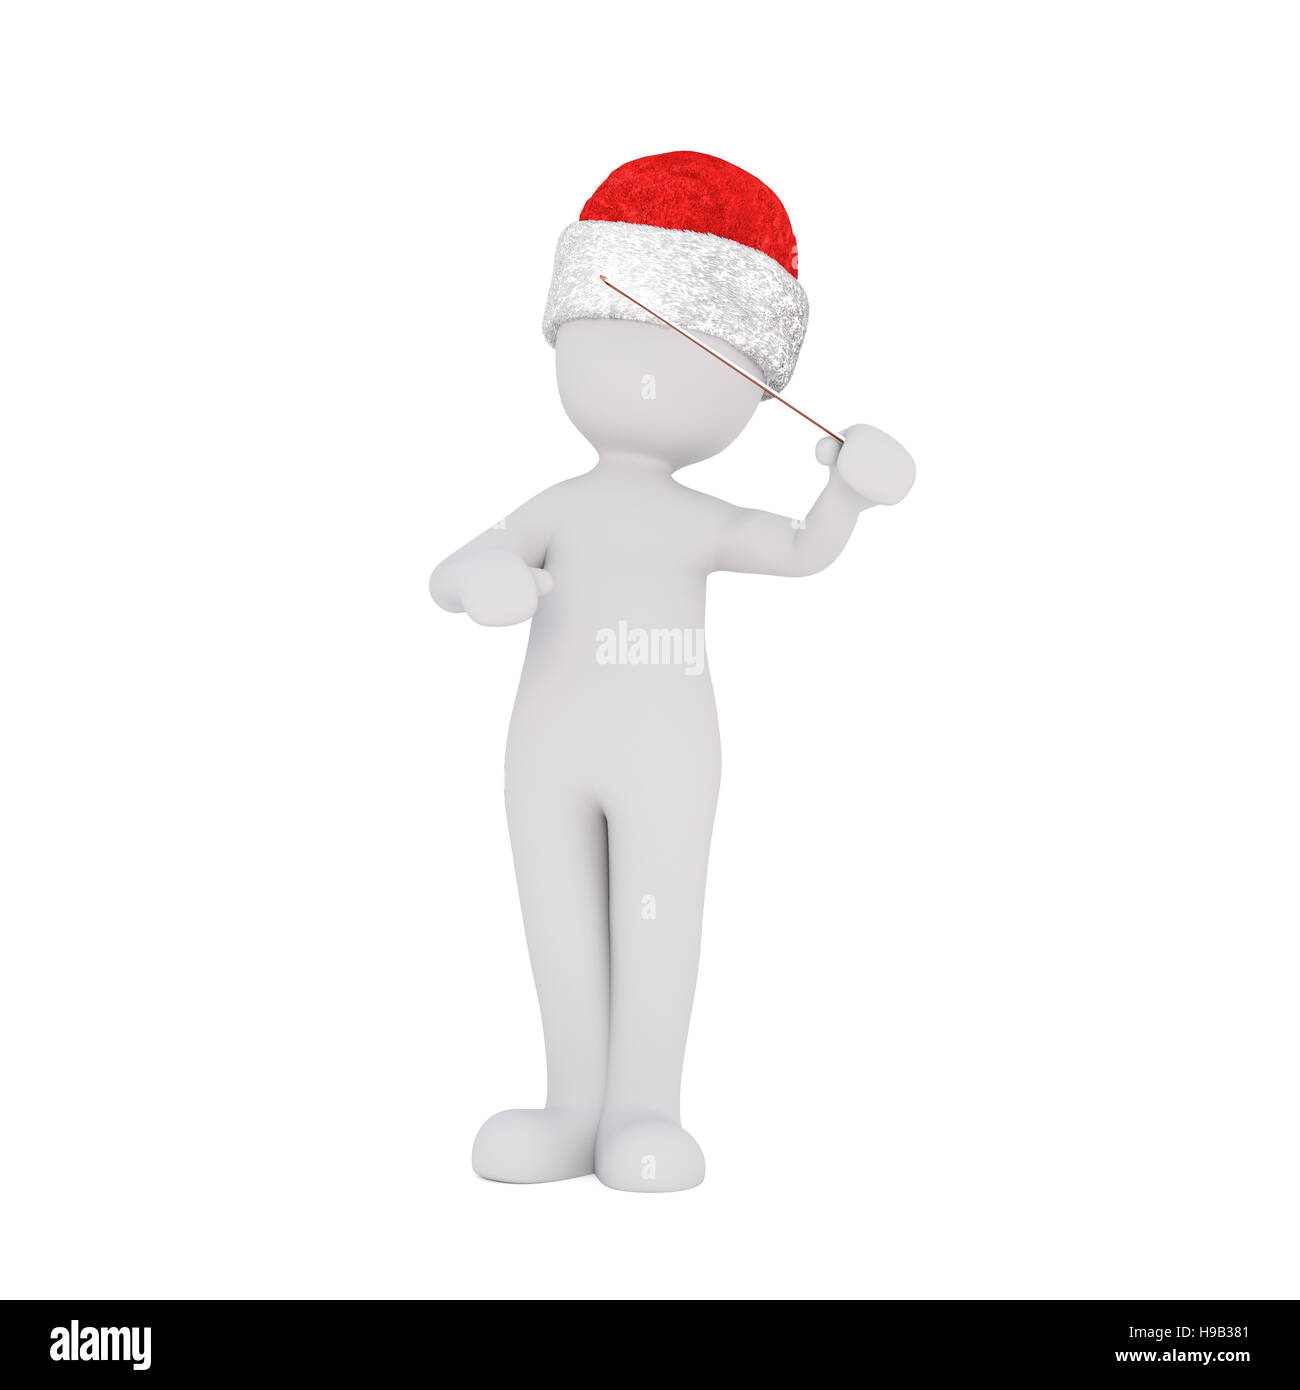 Single isolated 3D music conductor figure in red and white Santa Hat holding and gesturing with wand Stock Photo